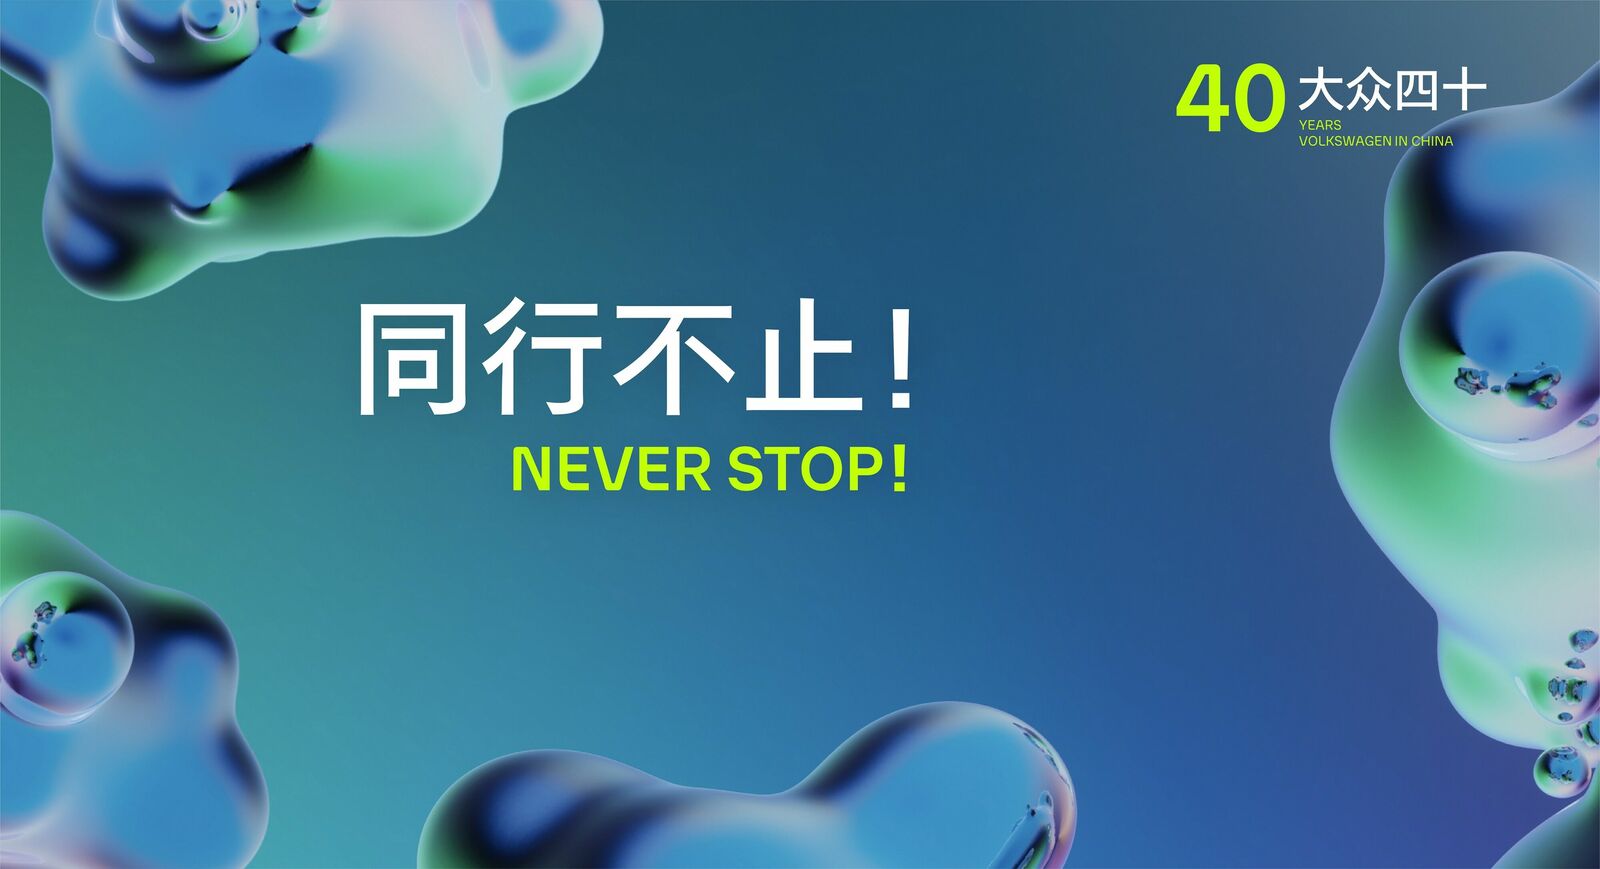 Key Visual of “40 Years Volkswagen in China, Never Stop” Campaign